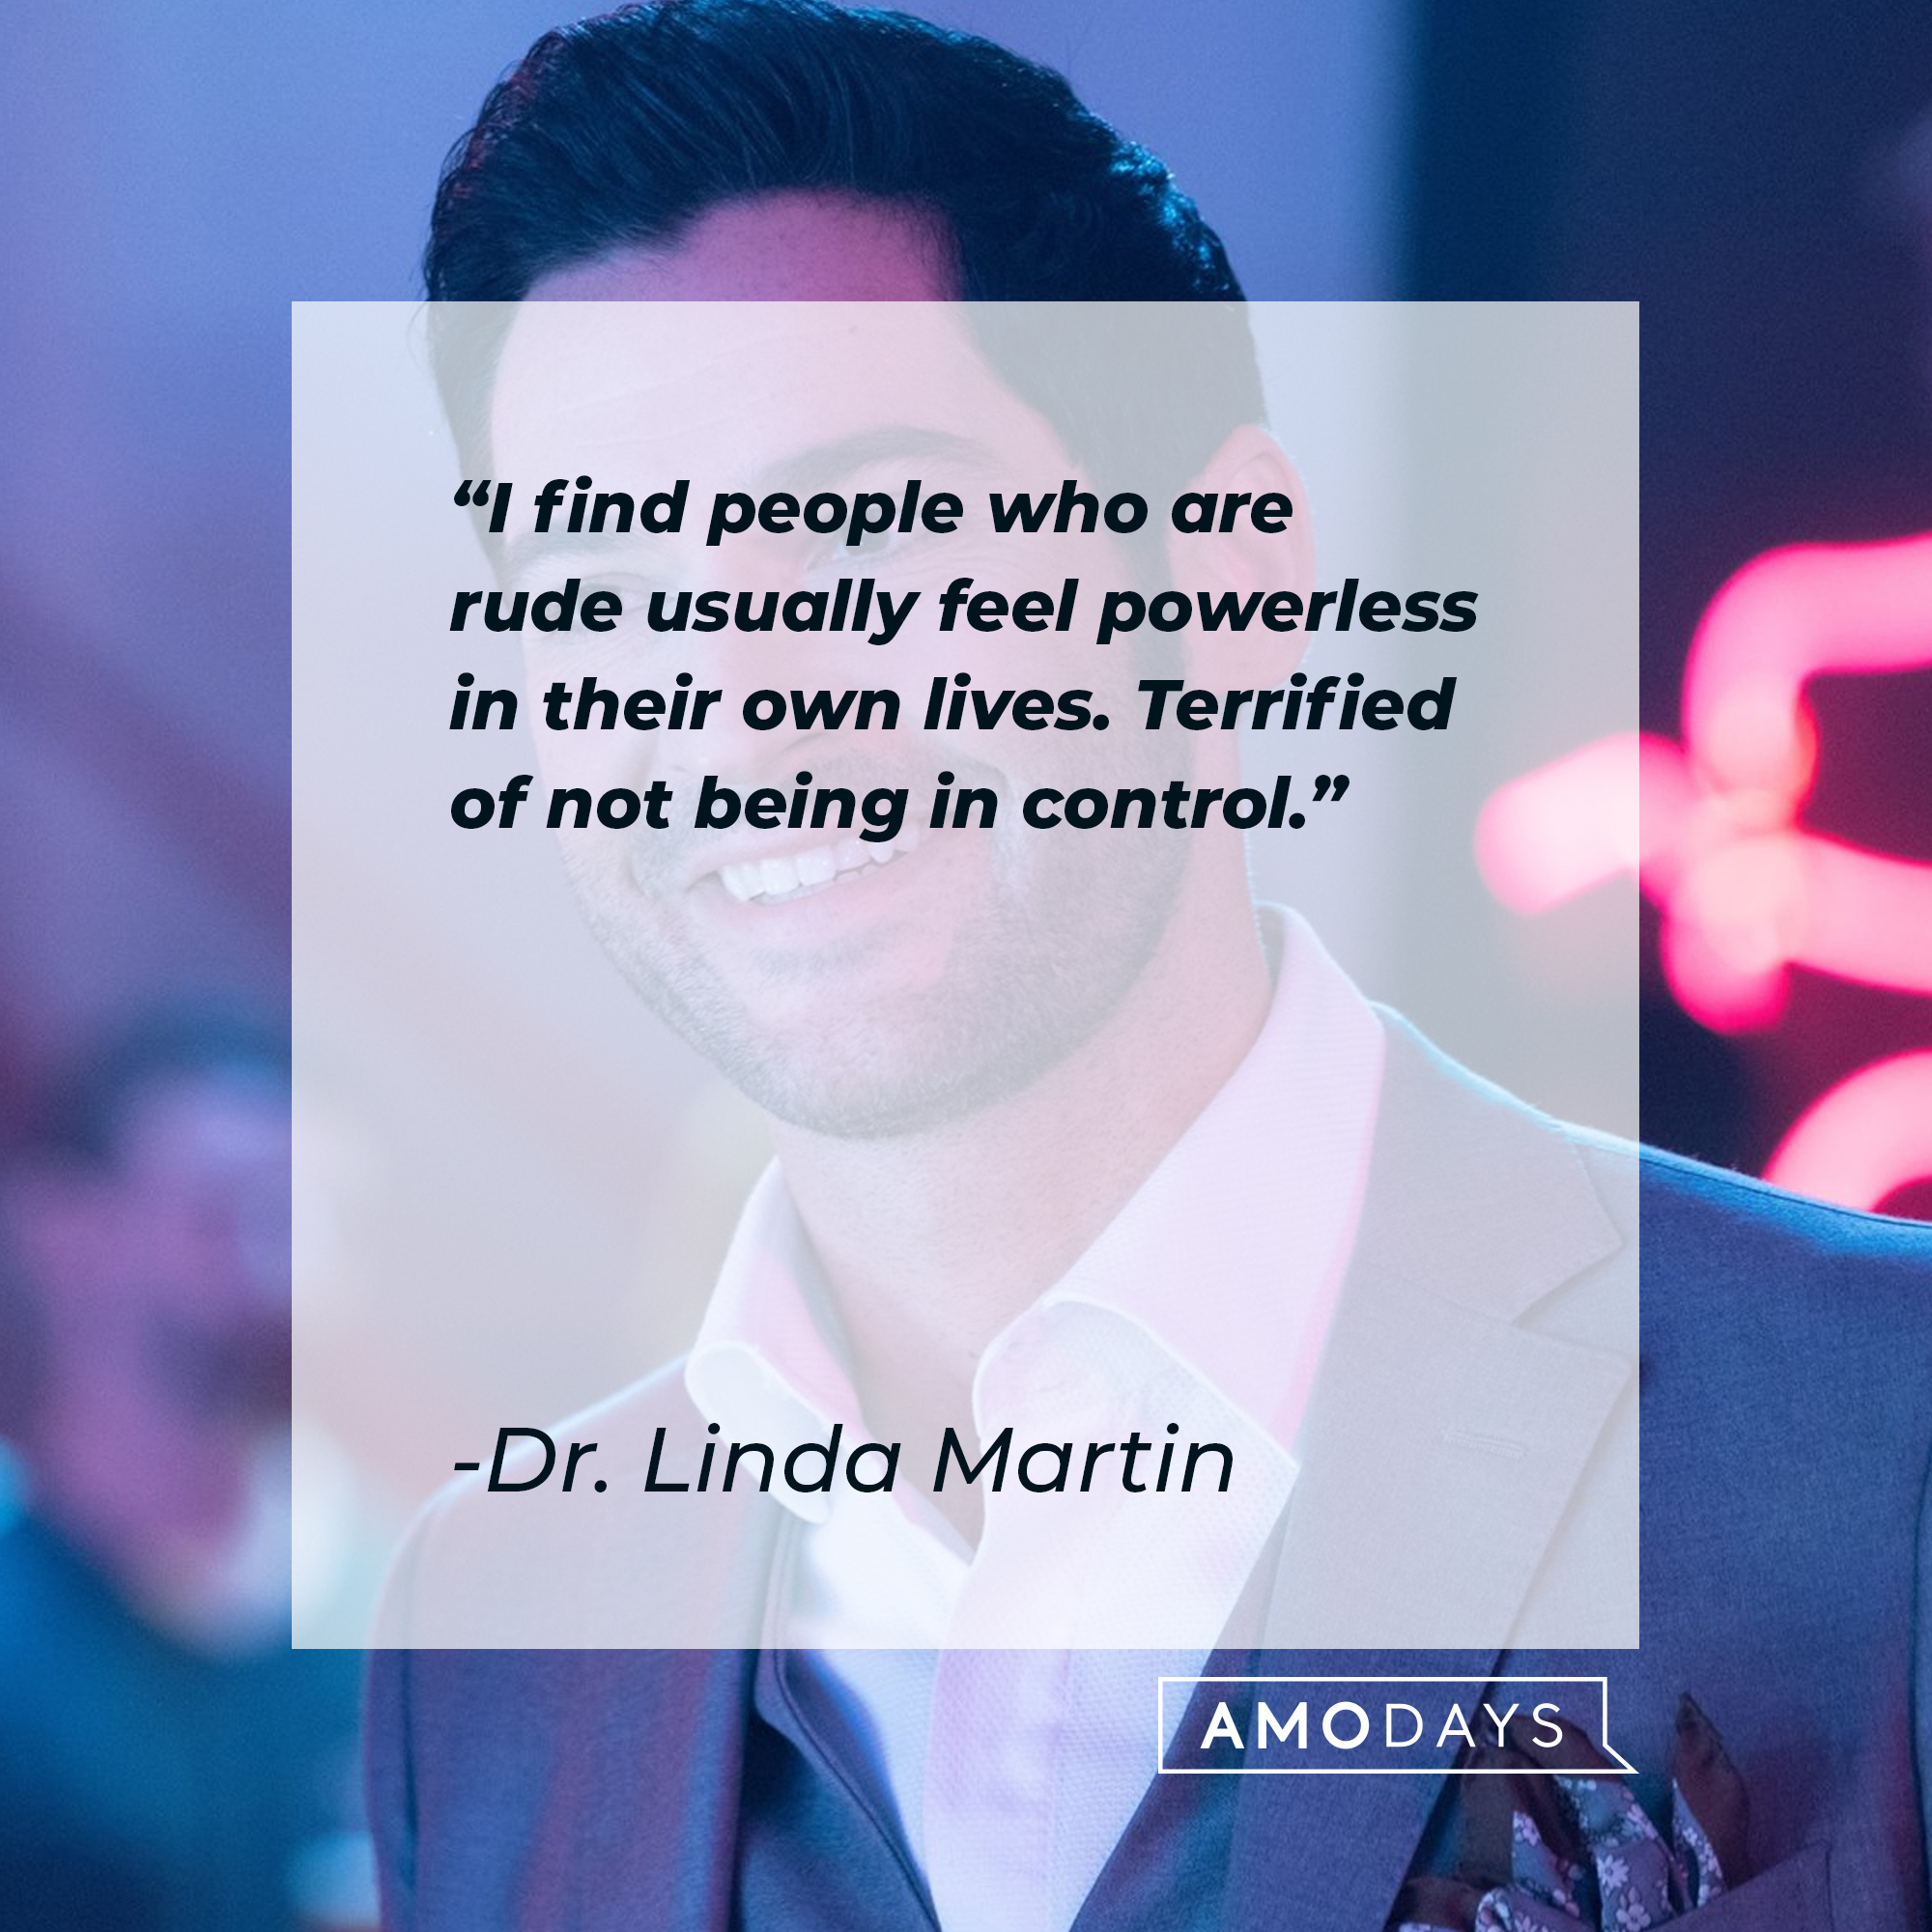 Dr. Linda Martin’s quote: "I find people who are rude usually feel powerless in their own lives. Terrified of not being in control." | Source: Facebook.com/LuciferNetflix